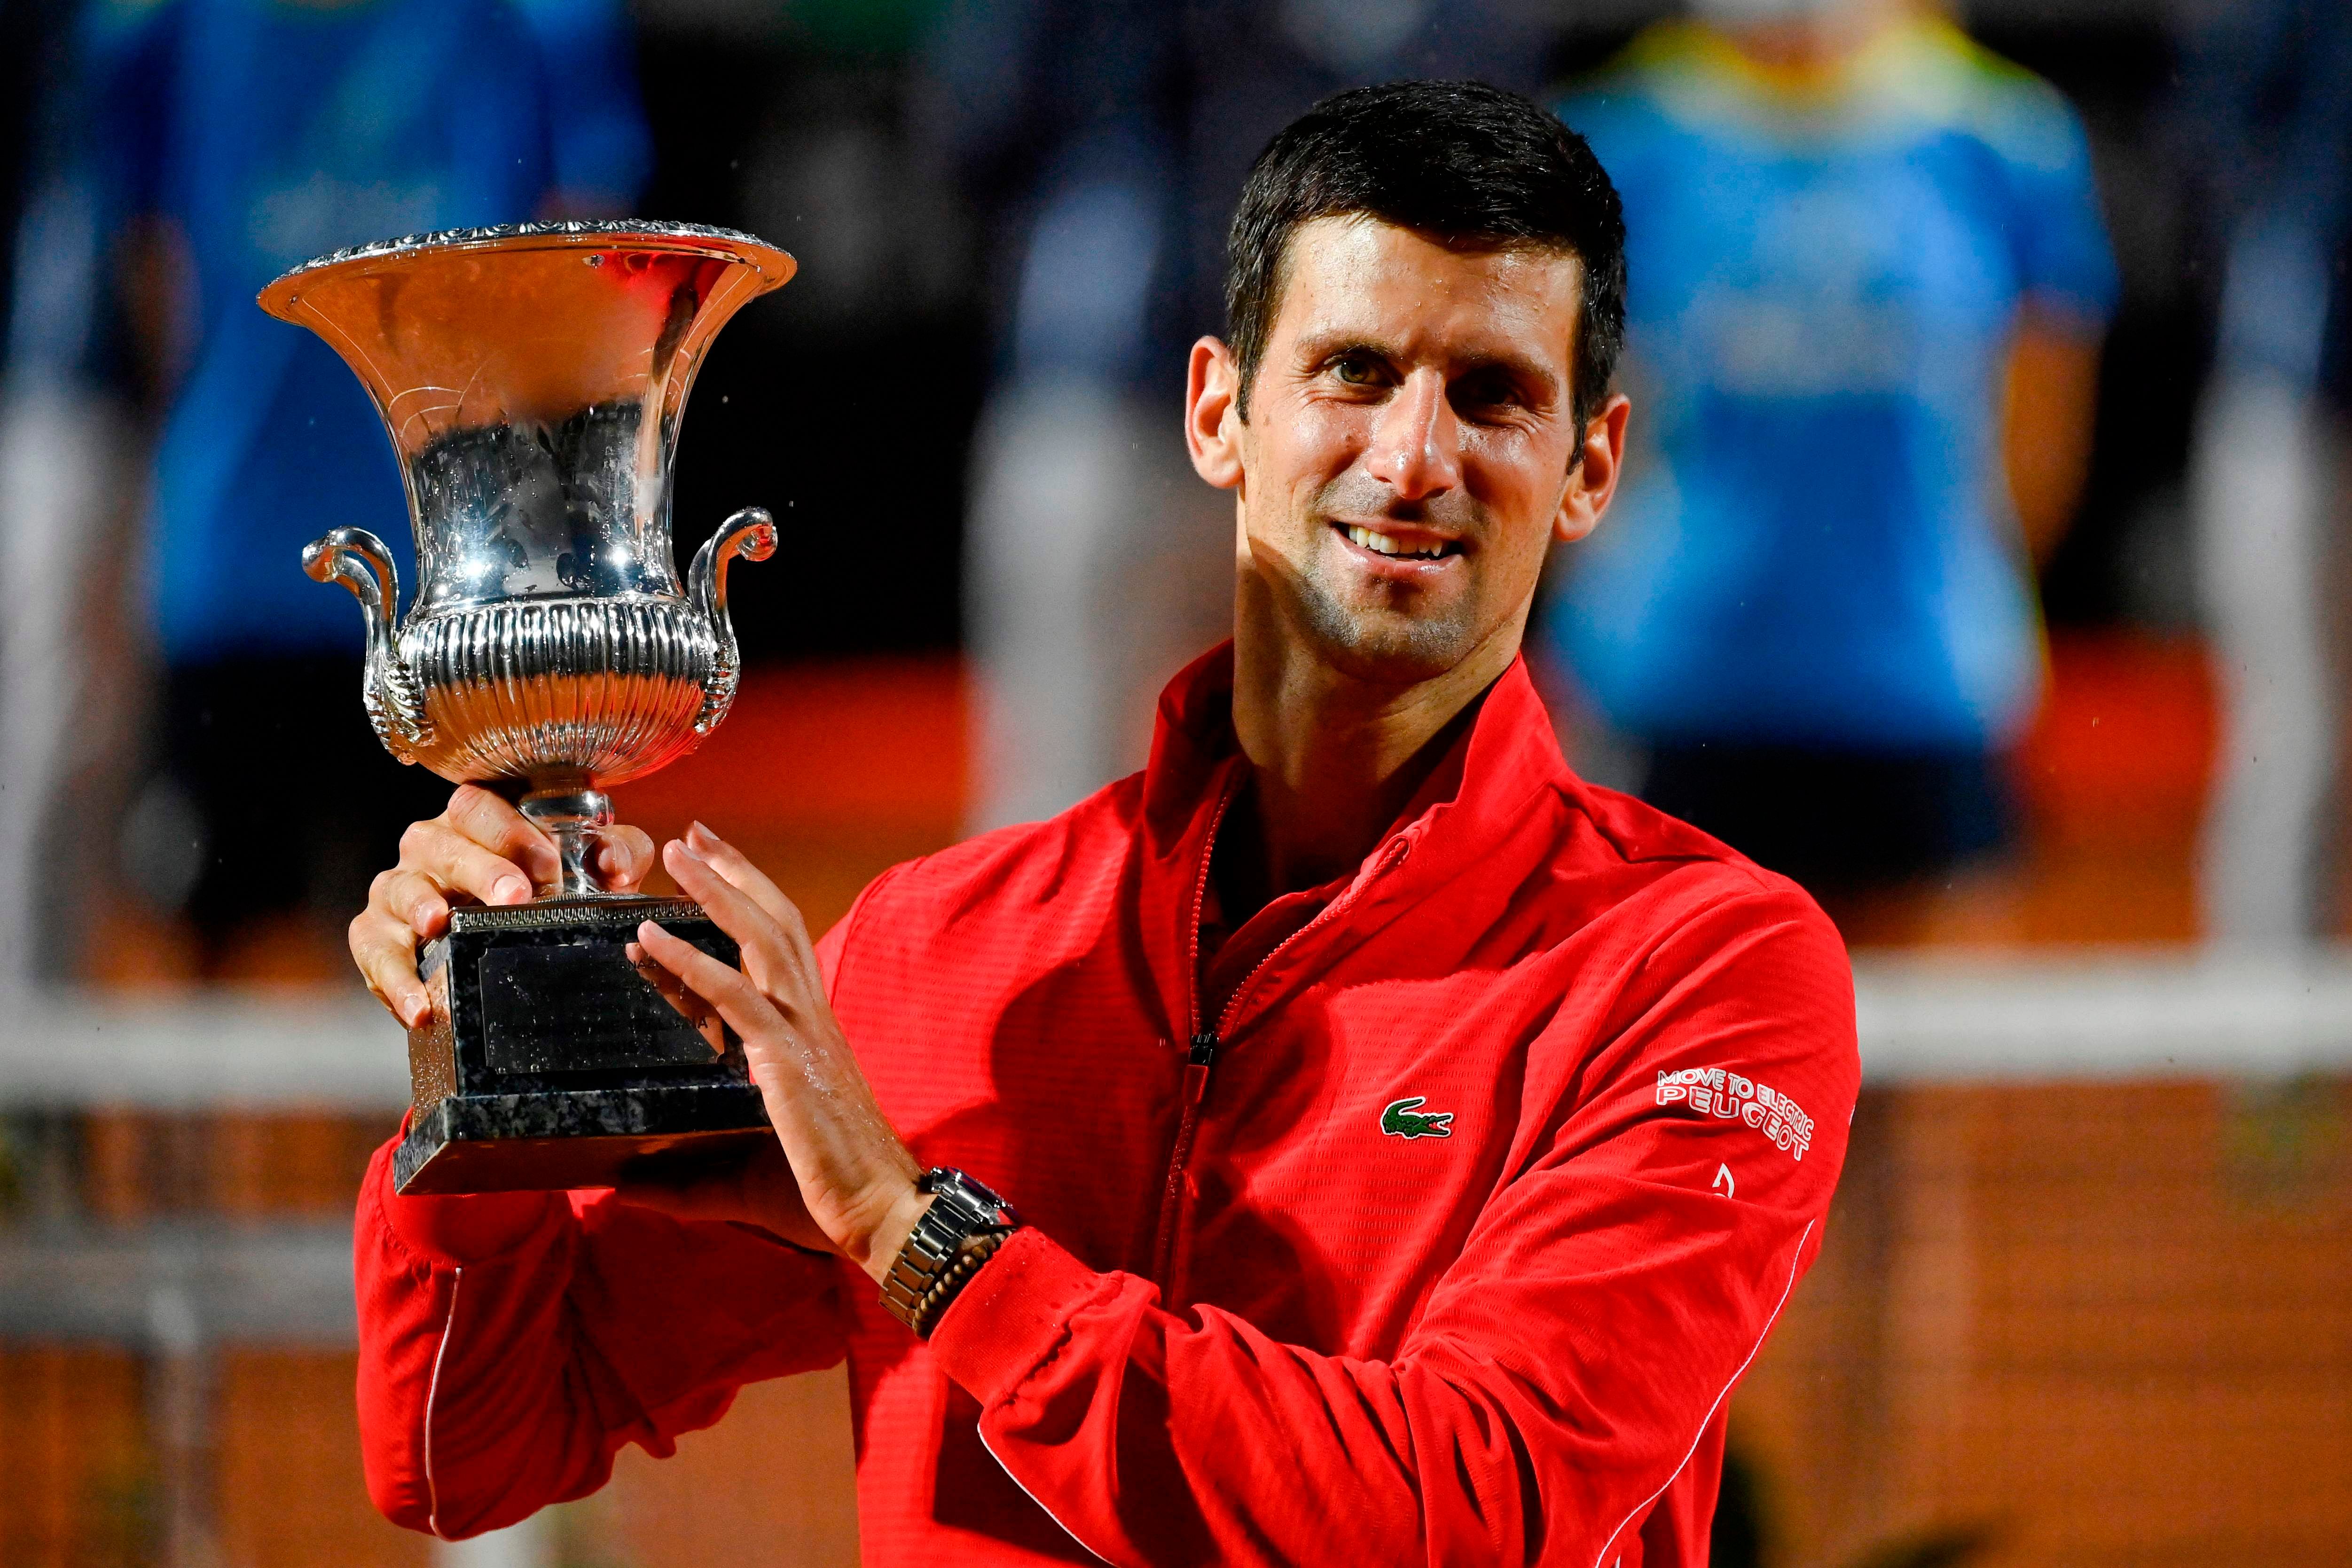 Serbia's Novak Djokovic poses with his trophy after winning the final match of the Men's Italian Open against Argentina's Diego Schwartzman at Foro Italico. Credits: AFP Photo